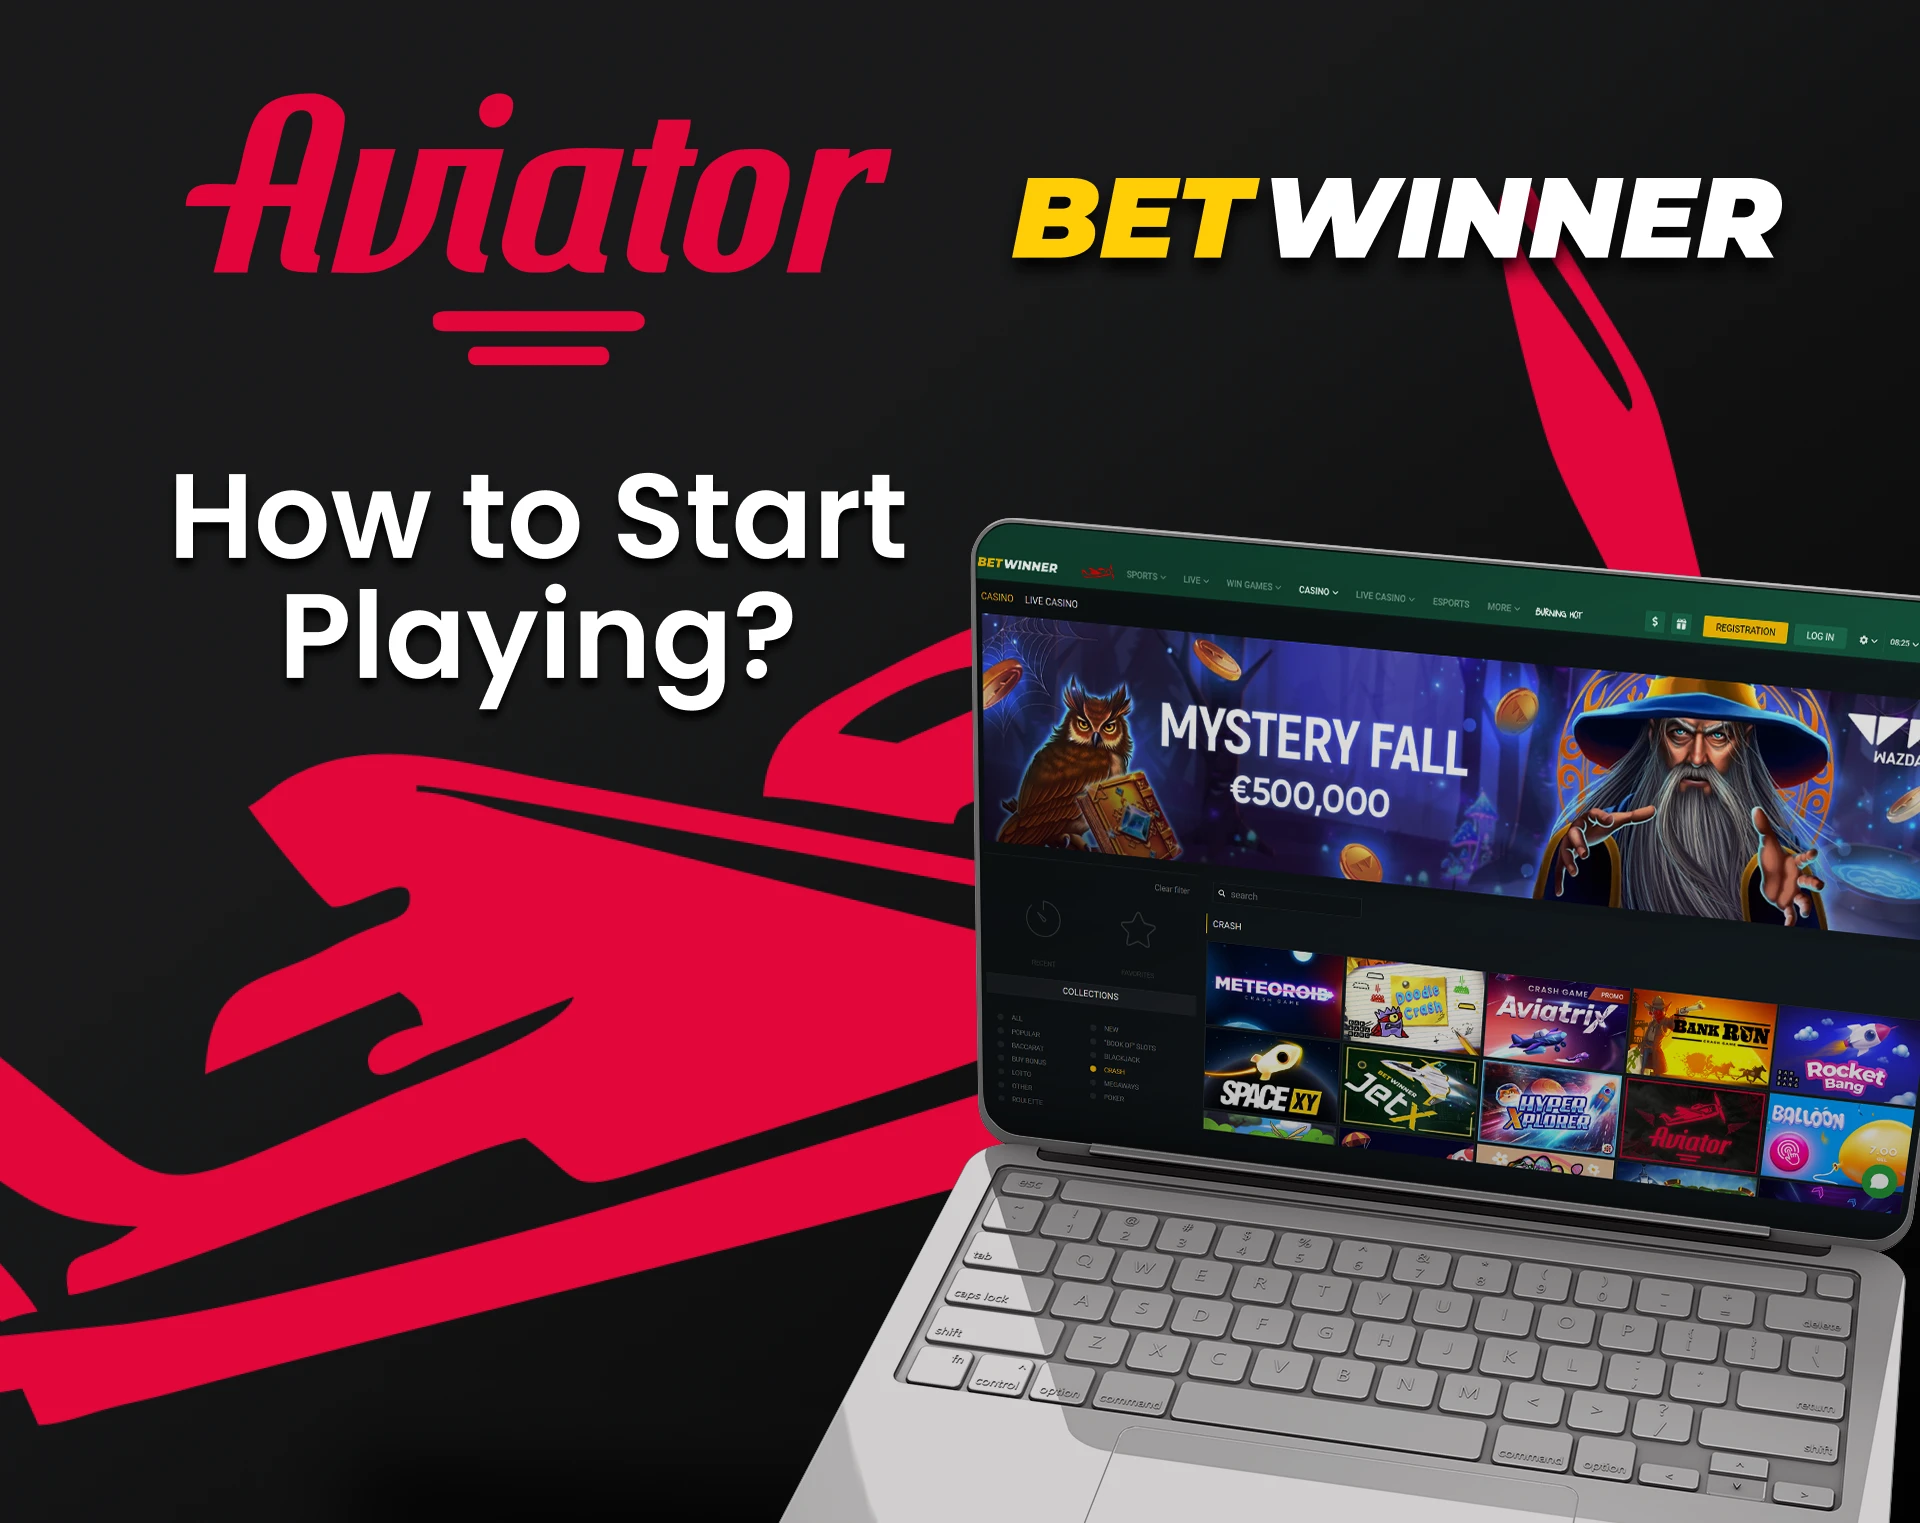 Go to the desired section on Betwinner to play Aviator.